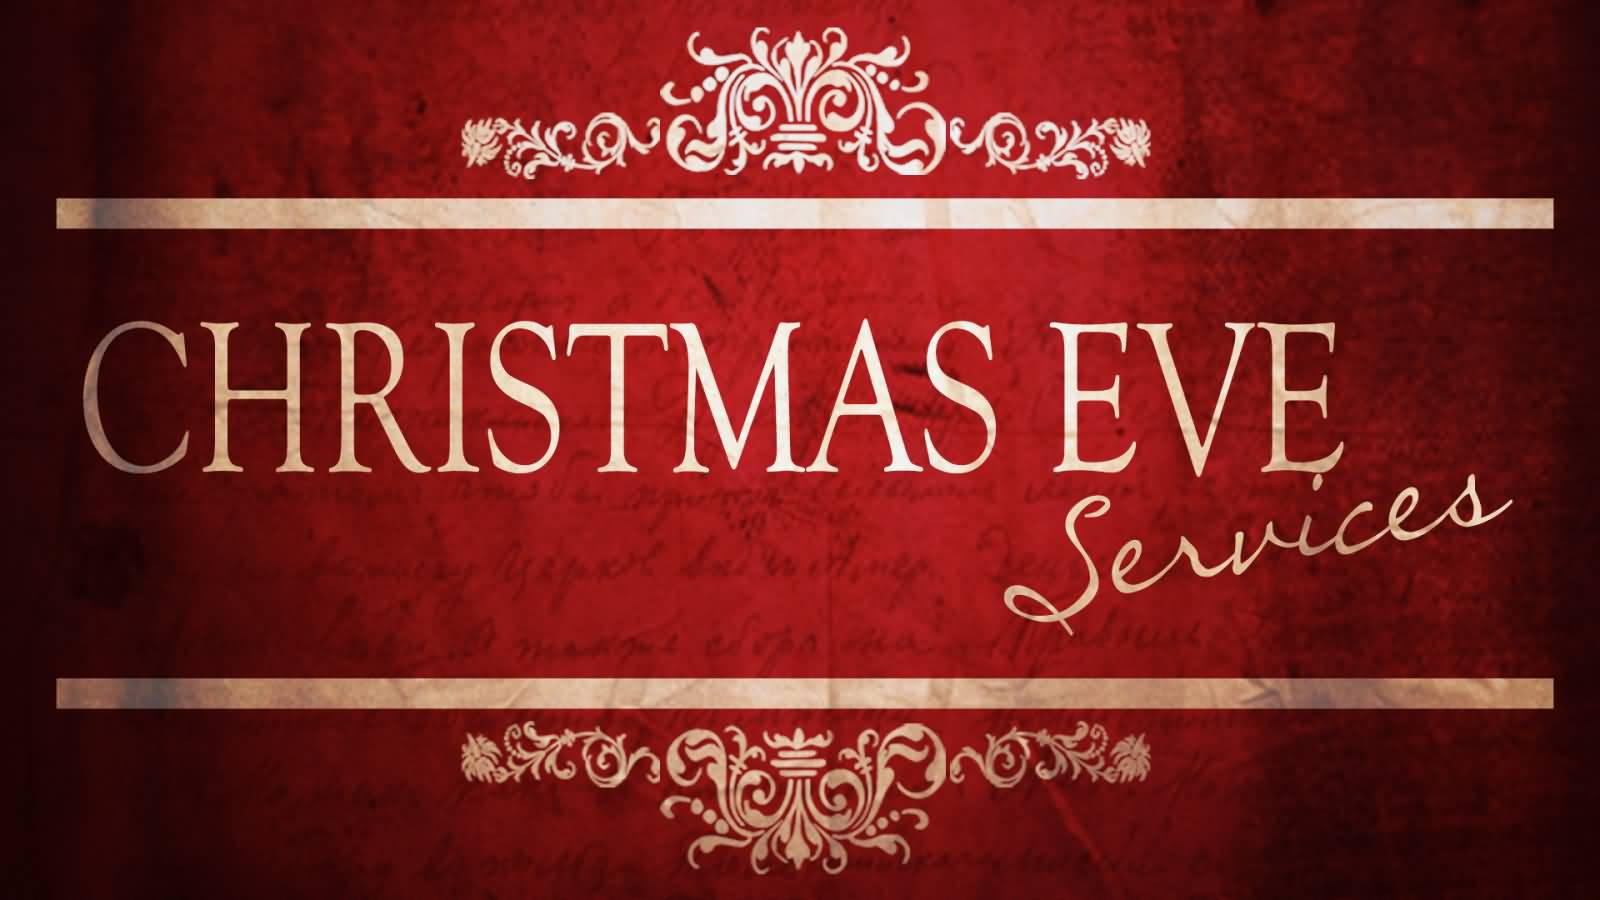 Christmas Eve Services Greeting Card